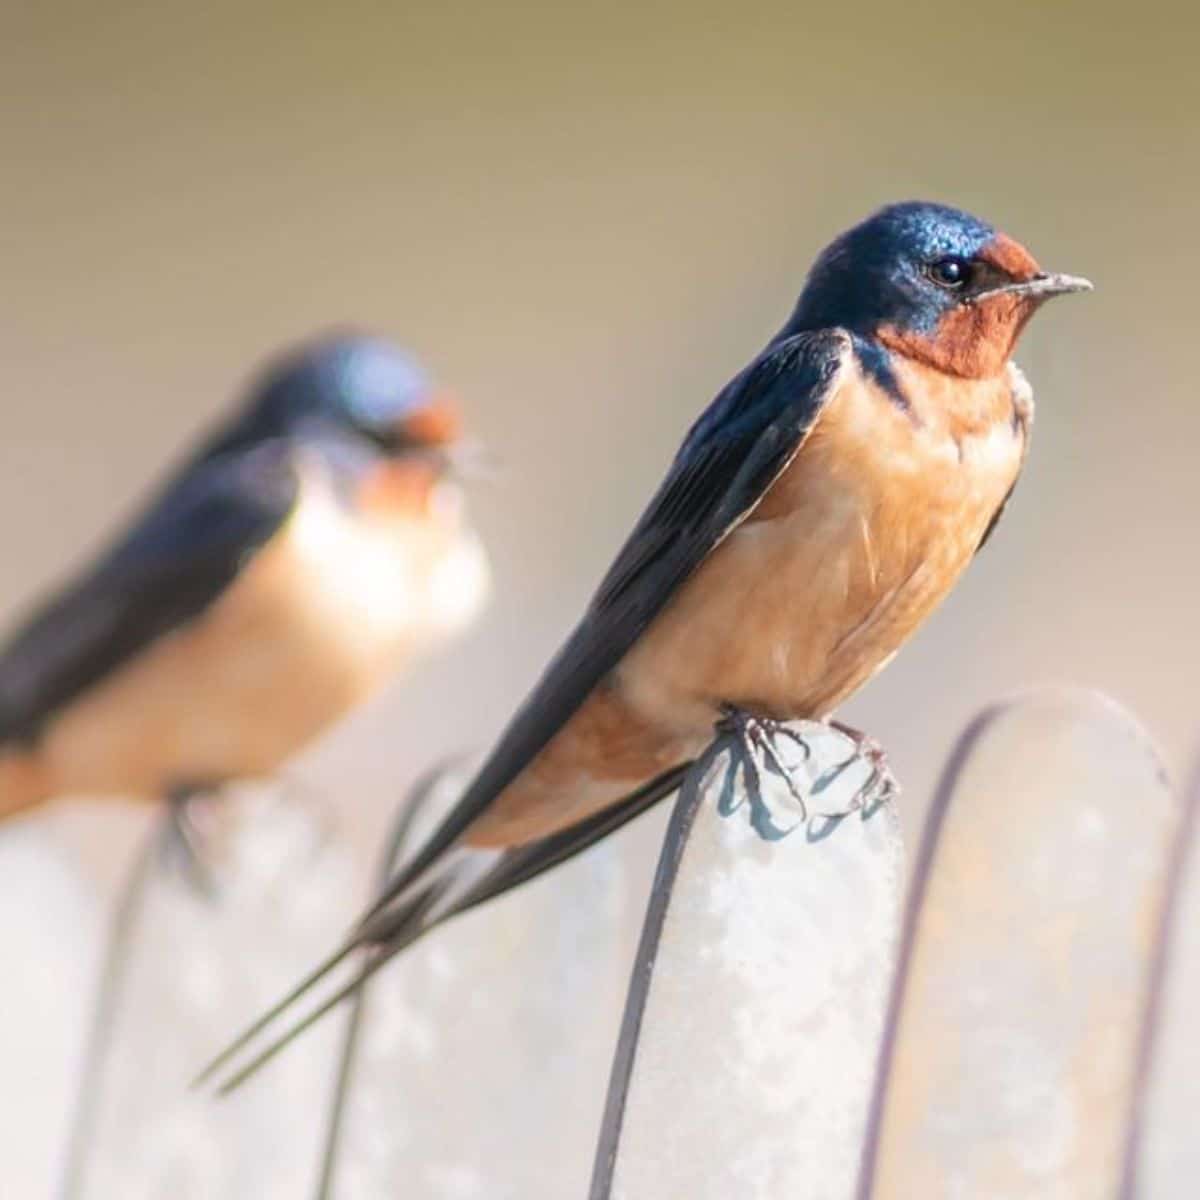 Two adorable Barn Swallows on perched on a fence.